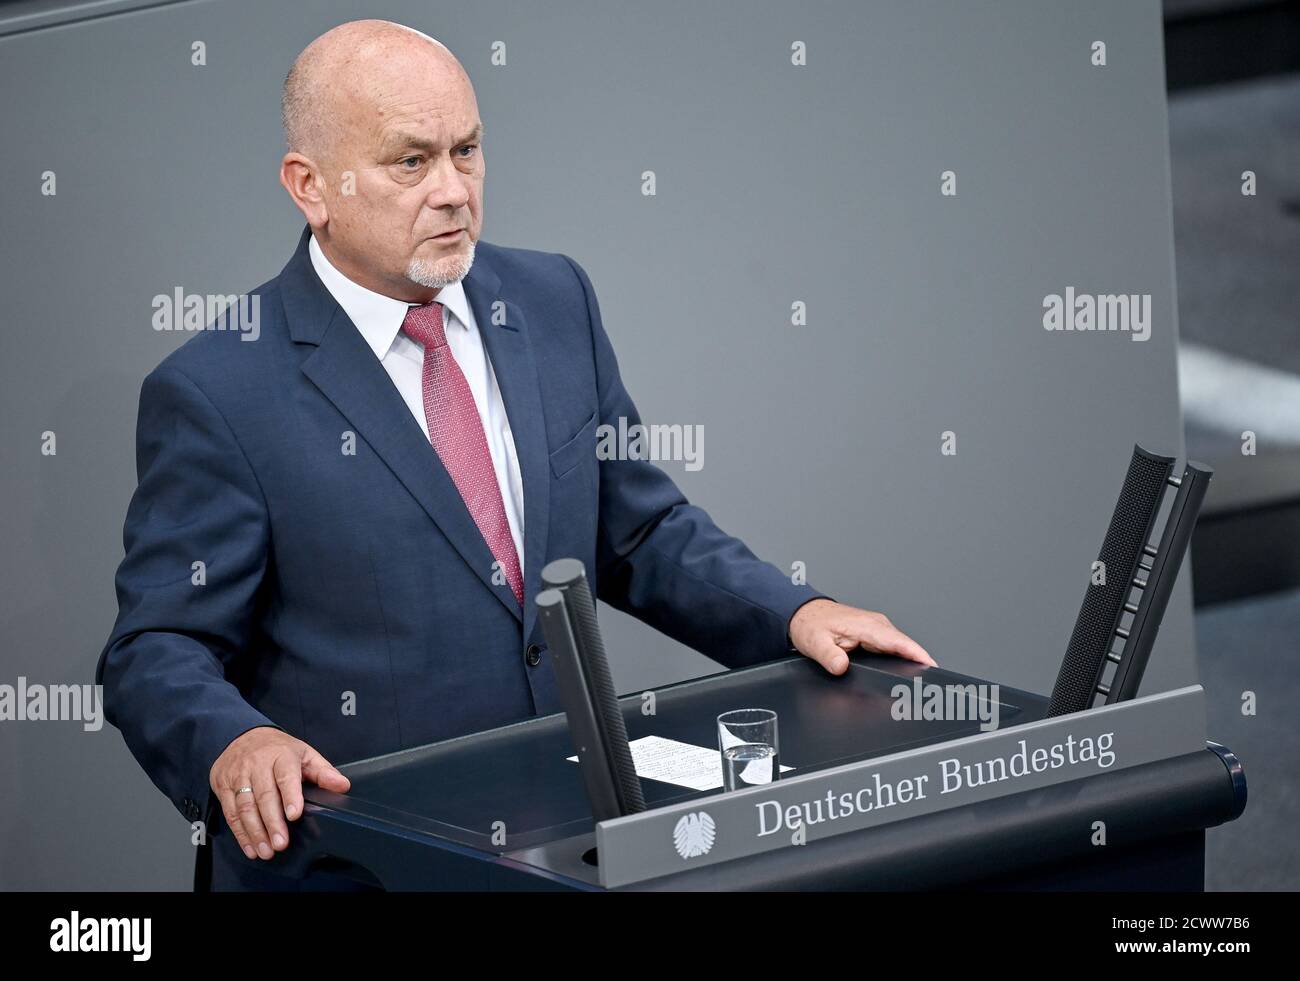 Berlin, Germany. 30th Sep, 2020. Manfred Grund, (CDU/CSU), speaks to the members of parliament during the budget week in the Bundestag. The Bundestag will debate the federal government's draft bill for the 2021 budget law. Credit: Britta Pedersen/dpa-Zentralbild/dpa/Alamy Live News Stock Photo